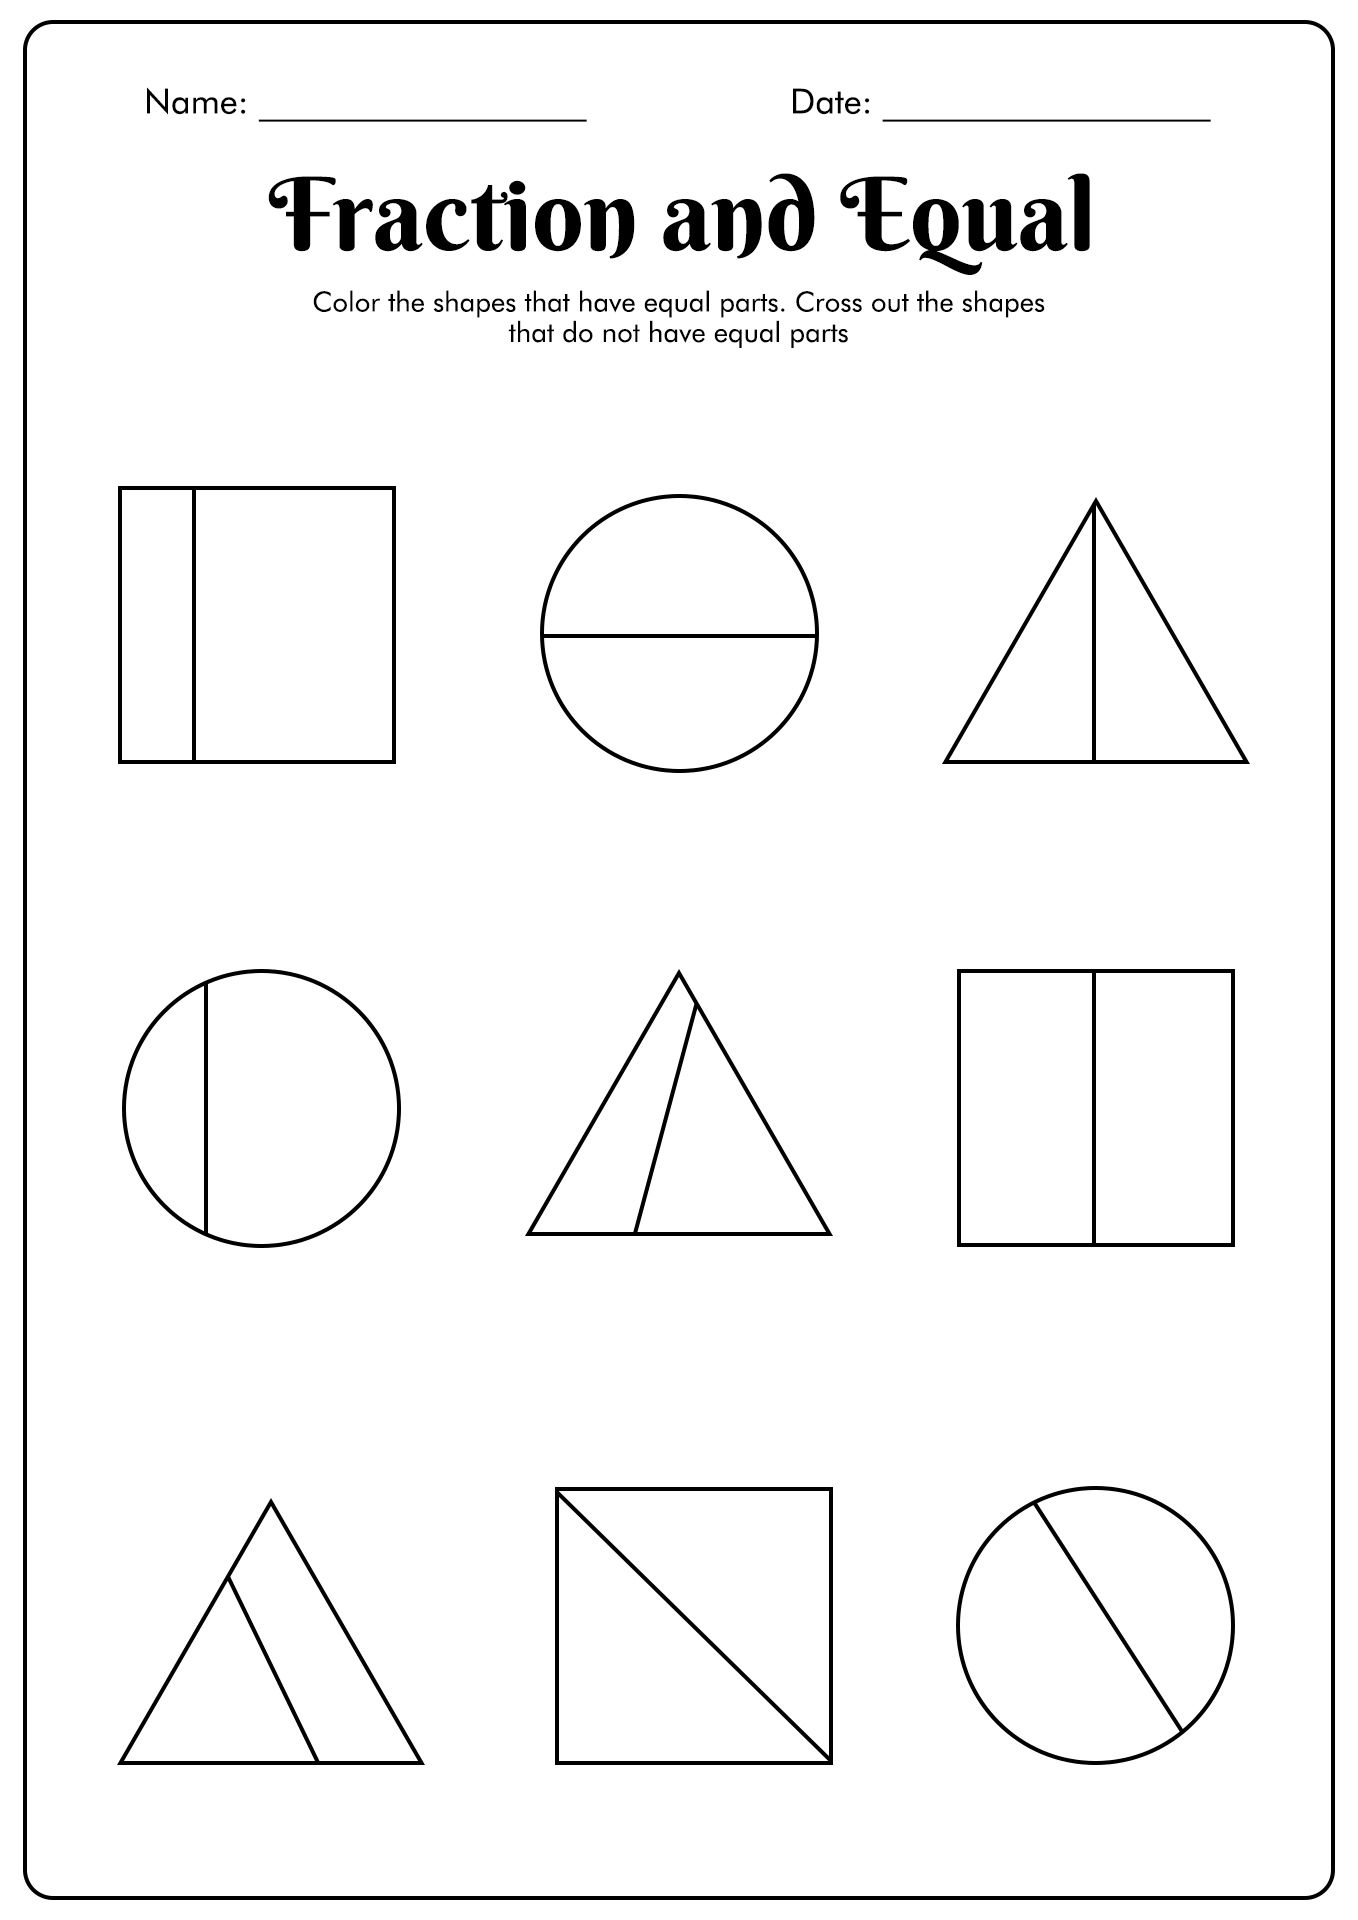 Fractions and Equal Parts Worksheet